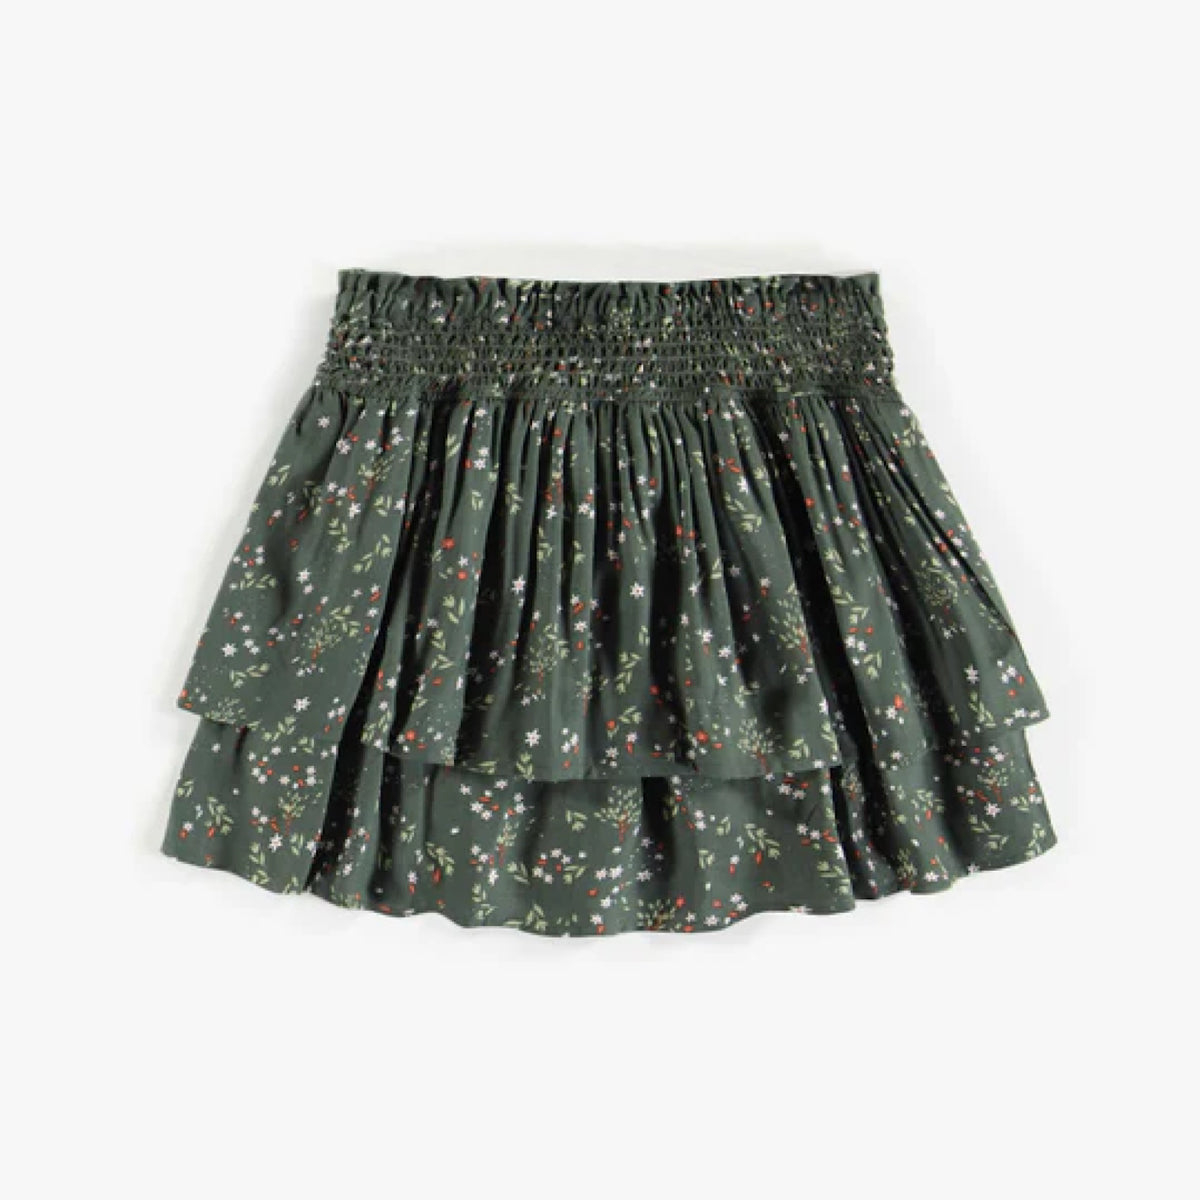 Floral Green Skirt with Ruffles